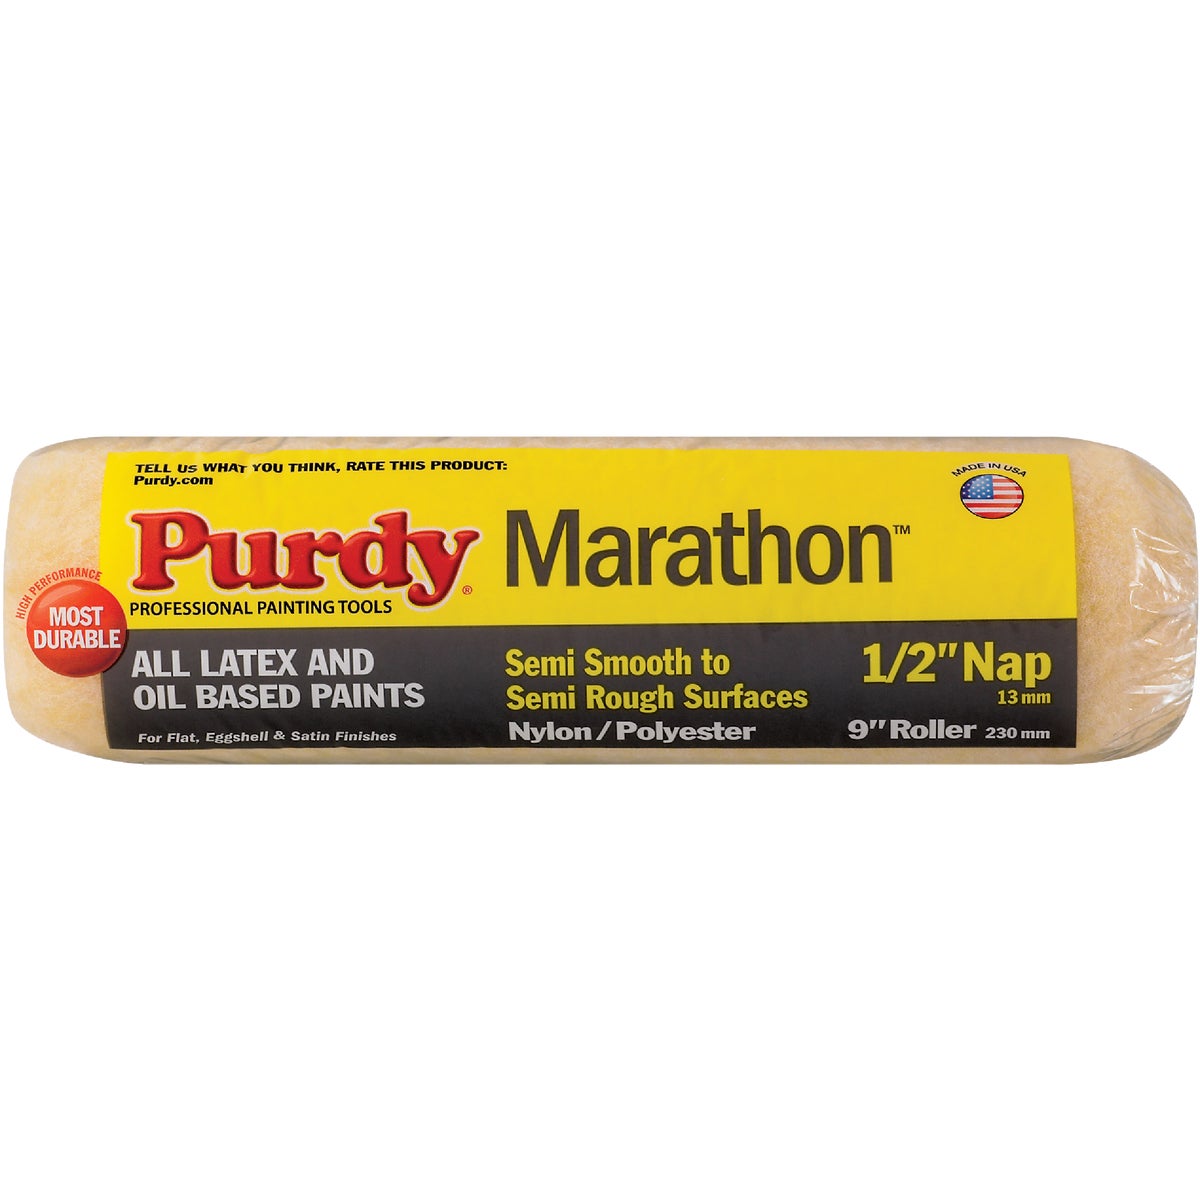 Purdy Marathon 9 In. x 1/2 In. Knit Fabric Roller Cover